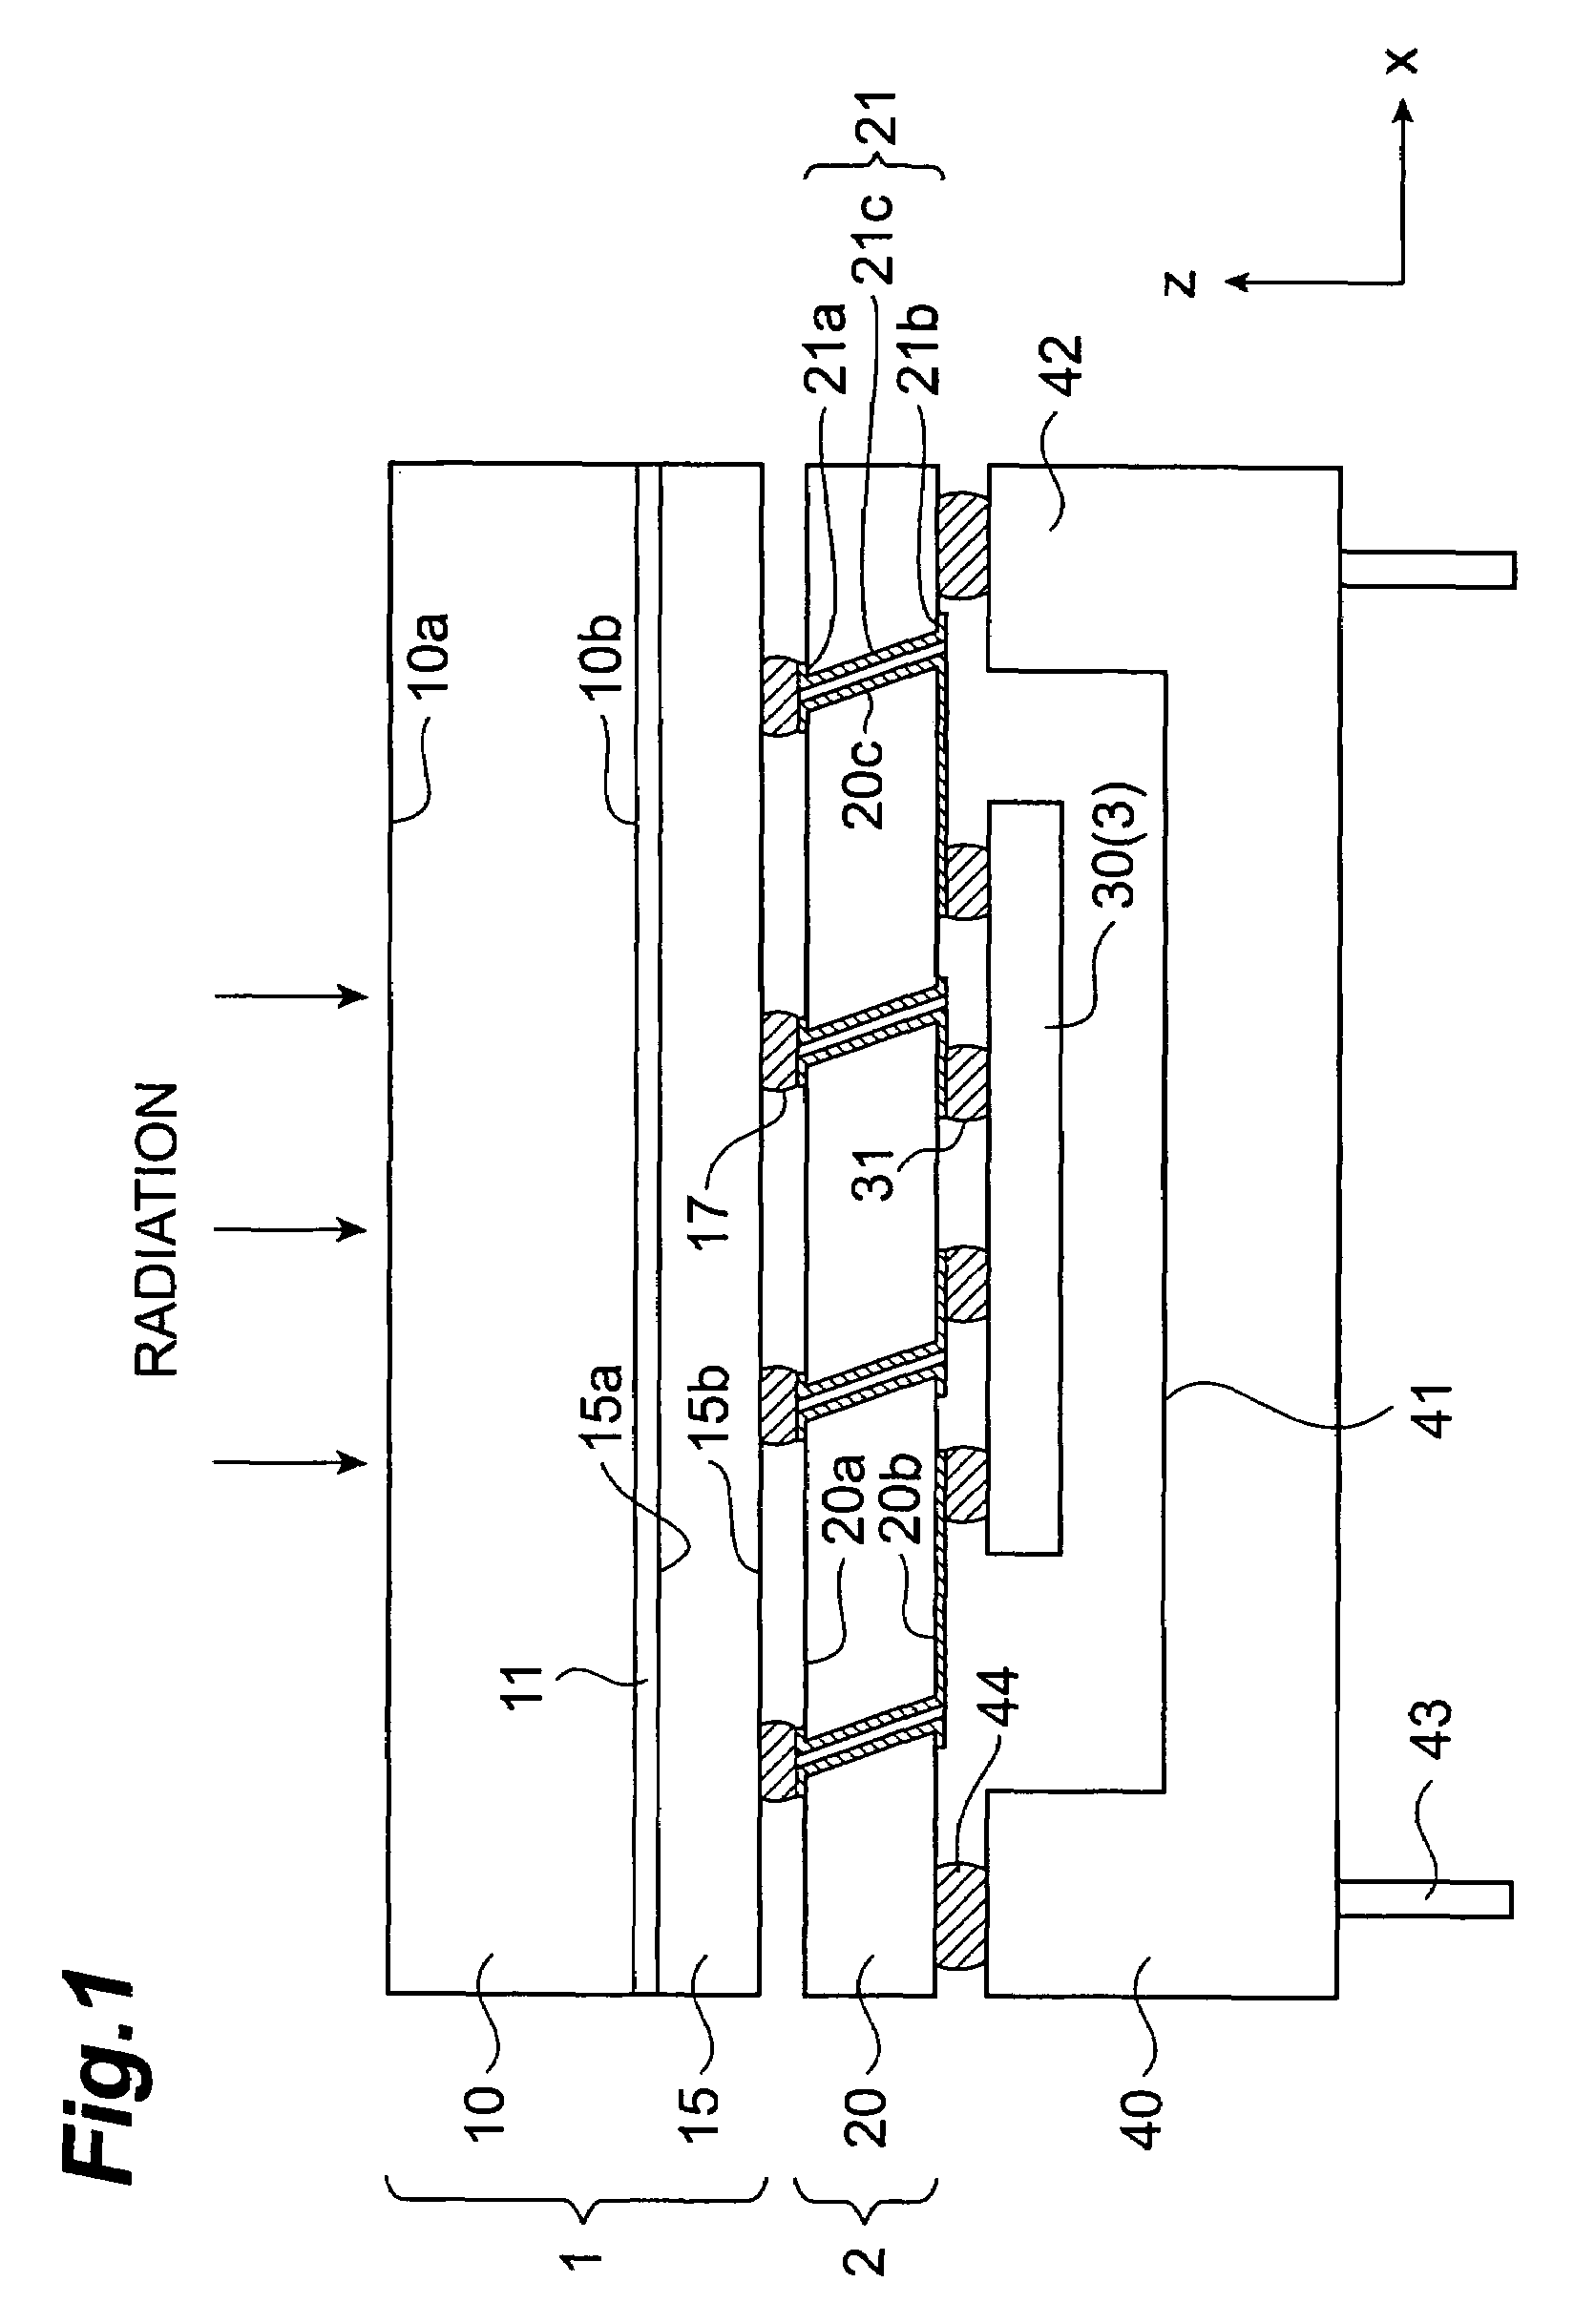 Wiring substrate and radiation detector using same